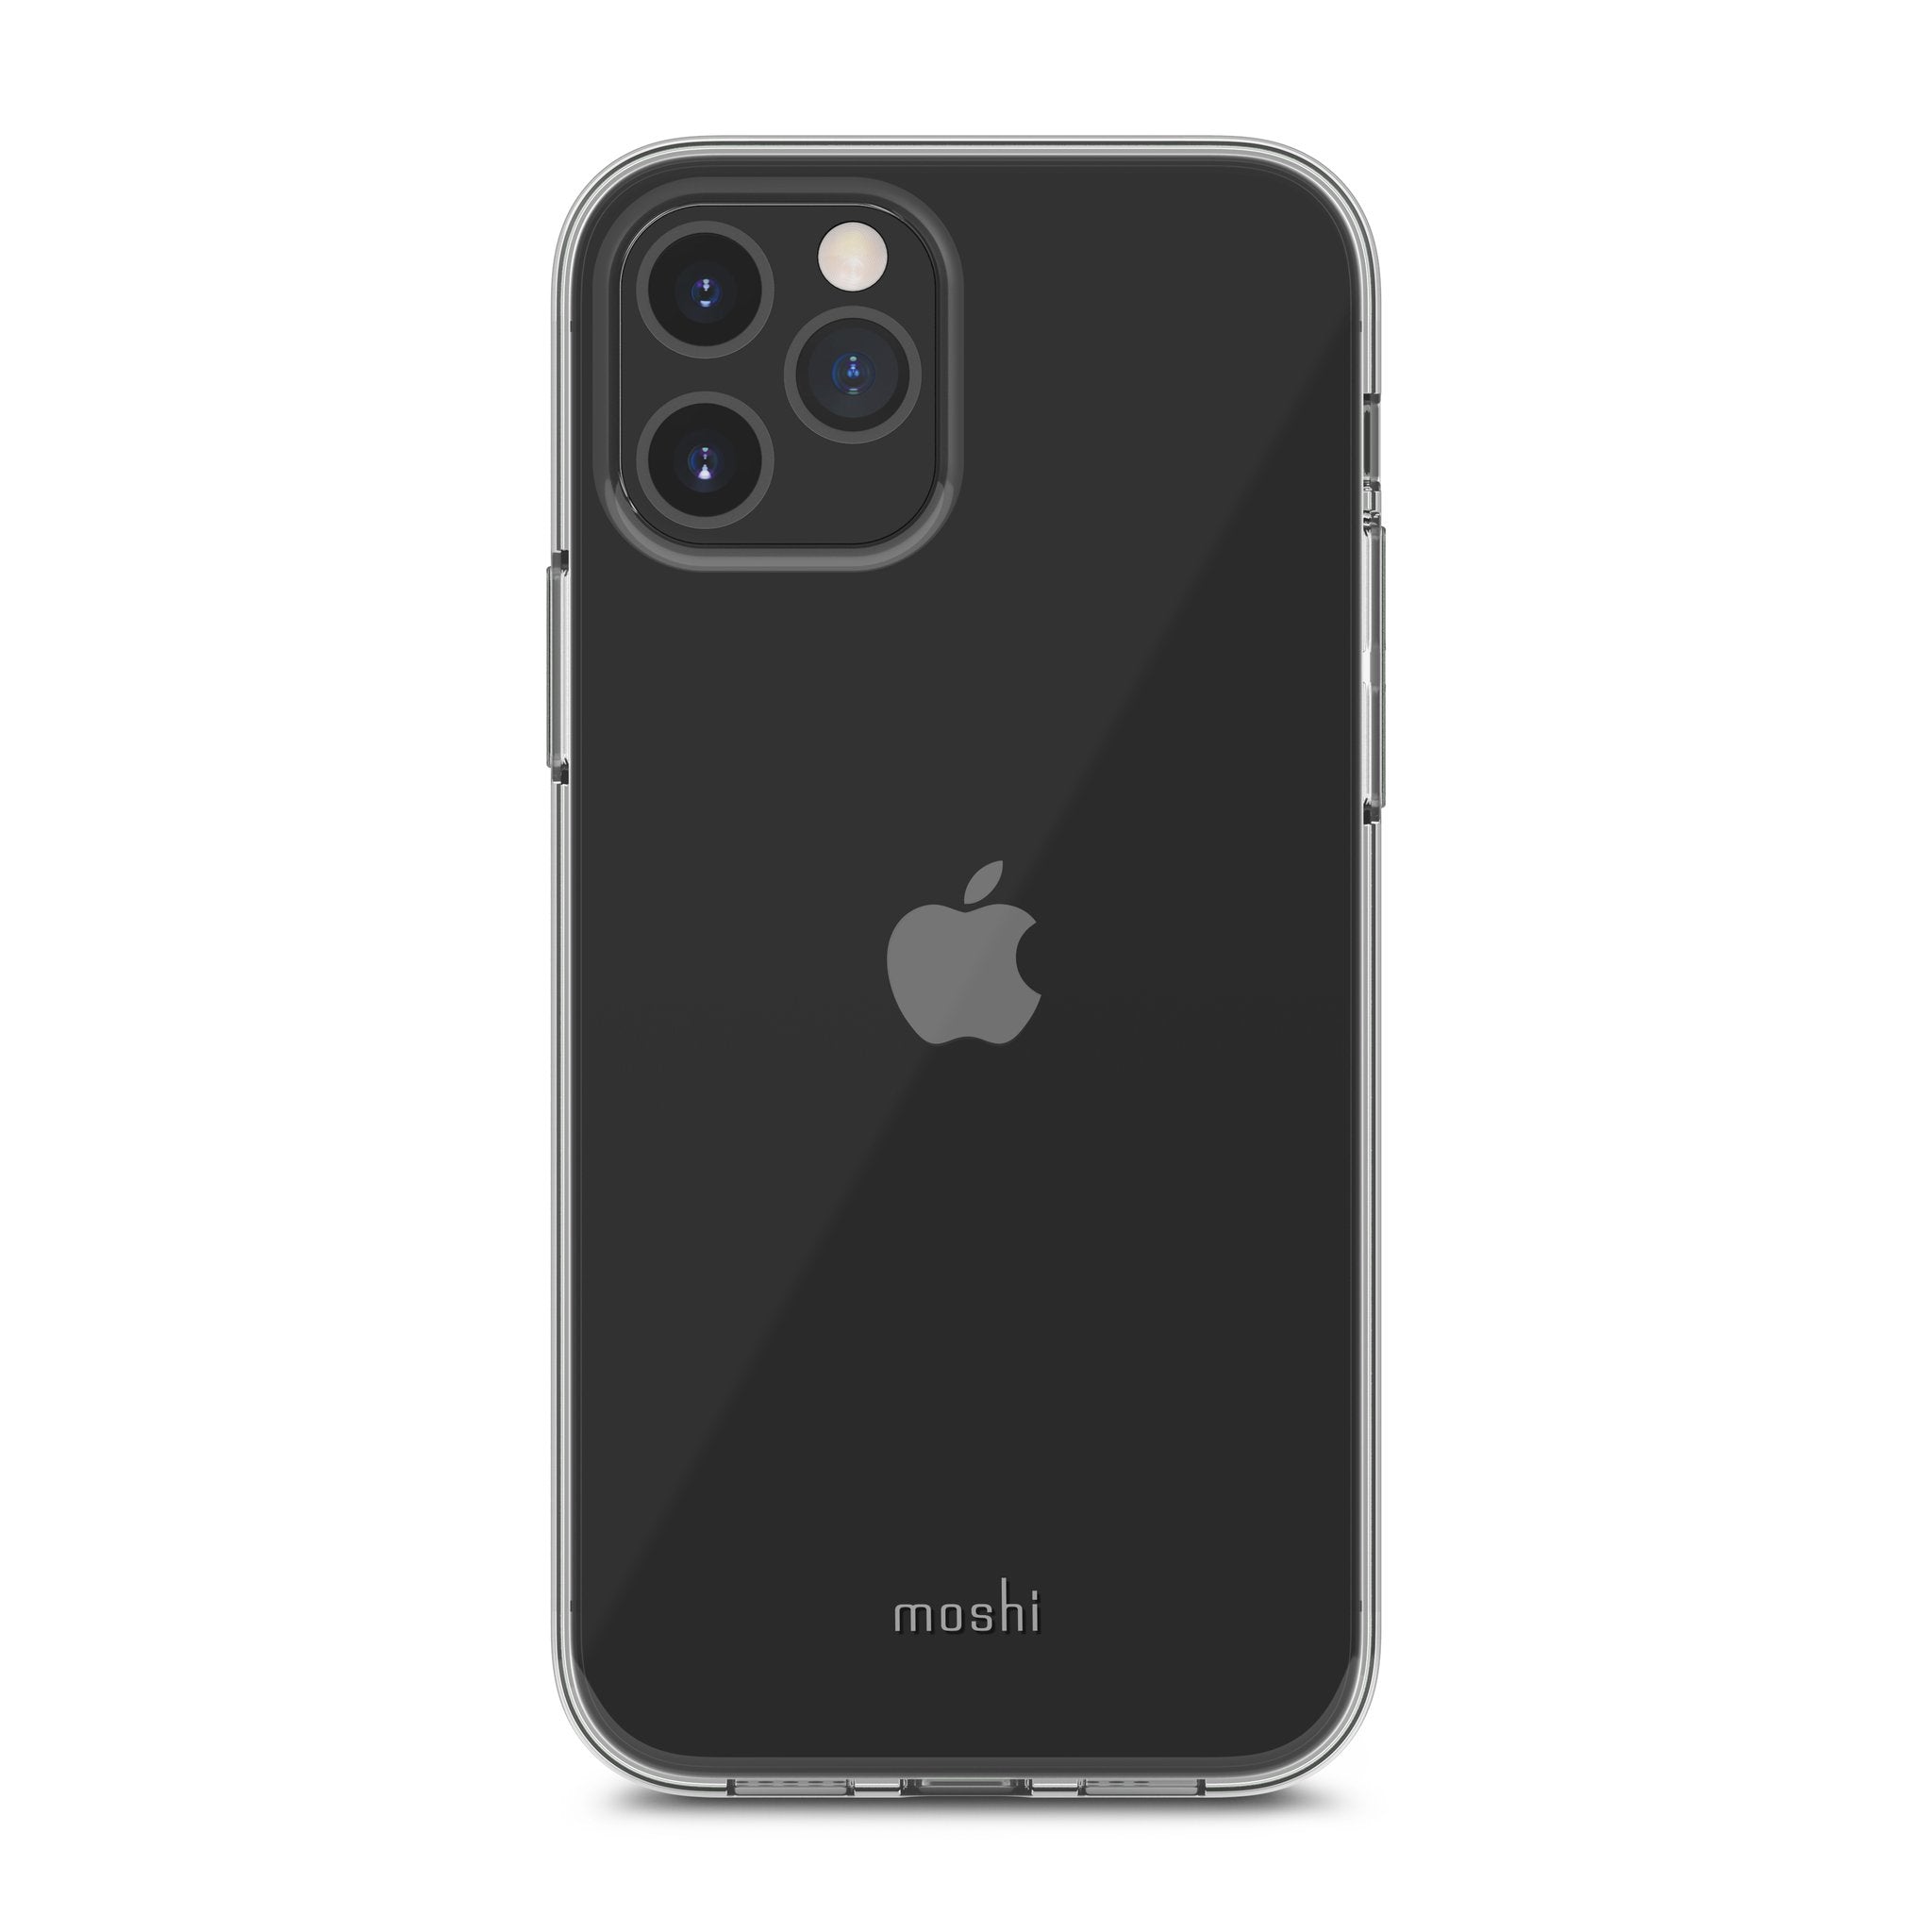 Moshi Vitros Case for iPhone 12 / 12 Pro - Crystal Clear